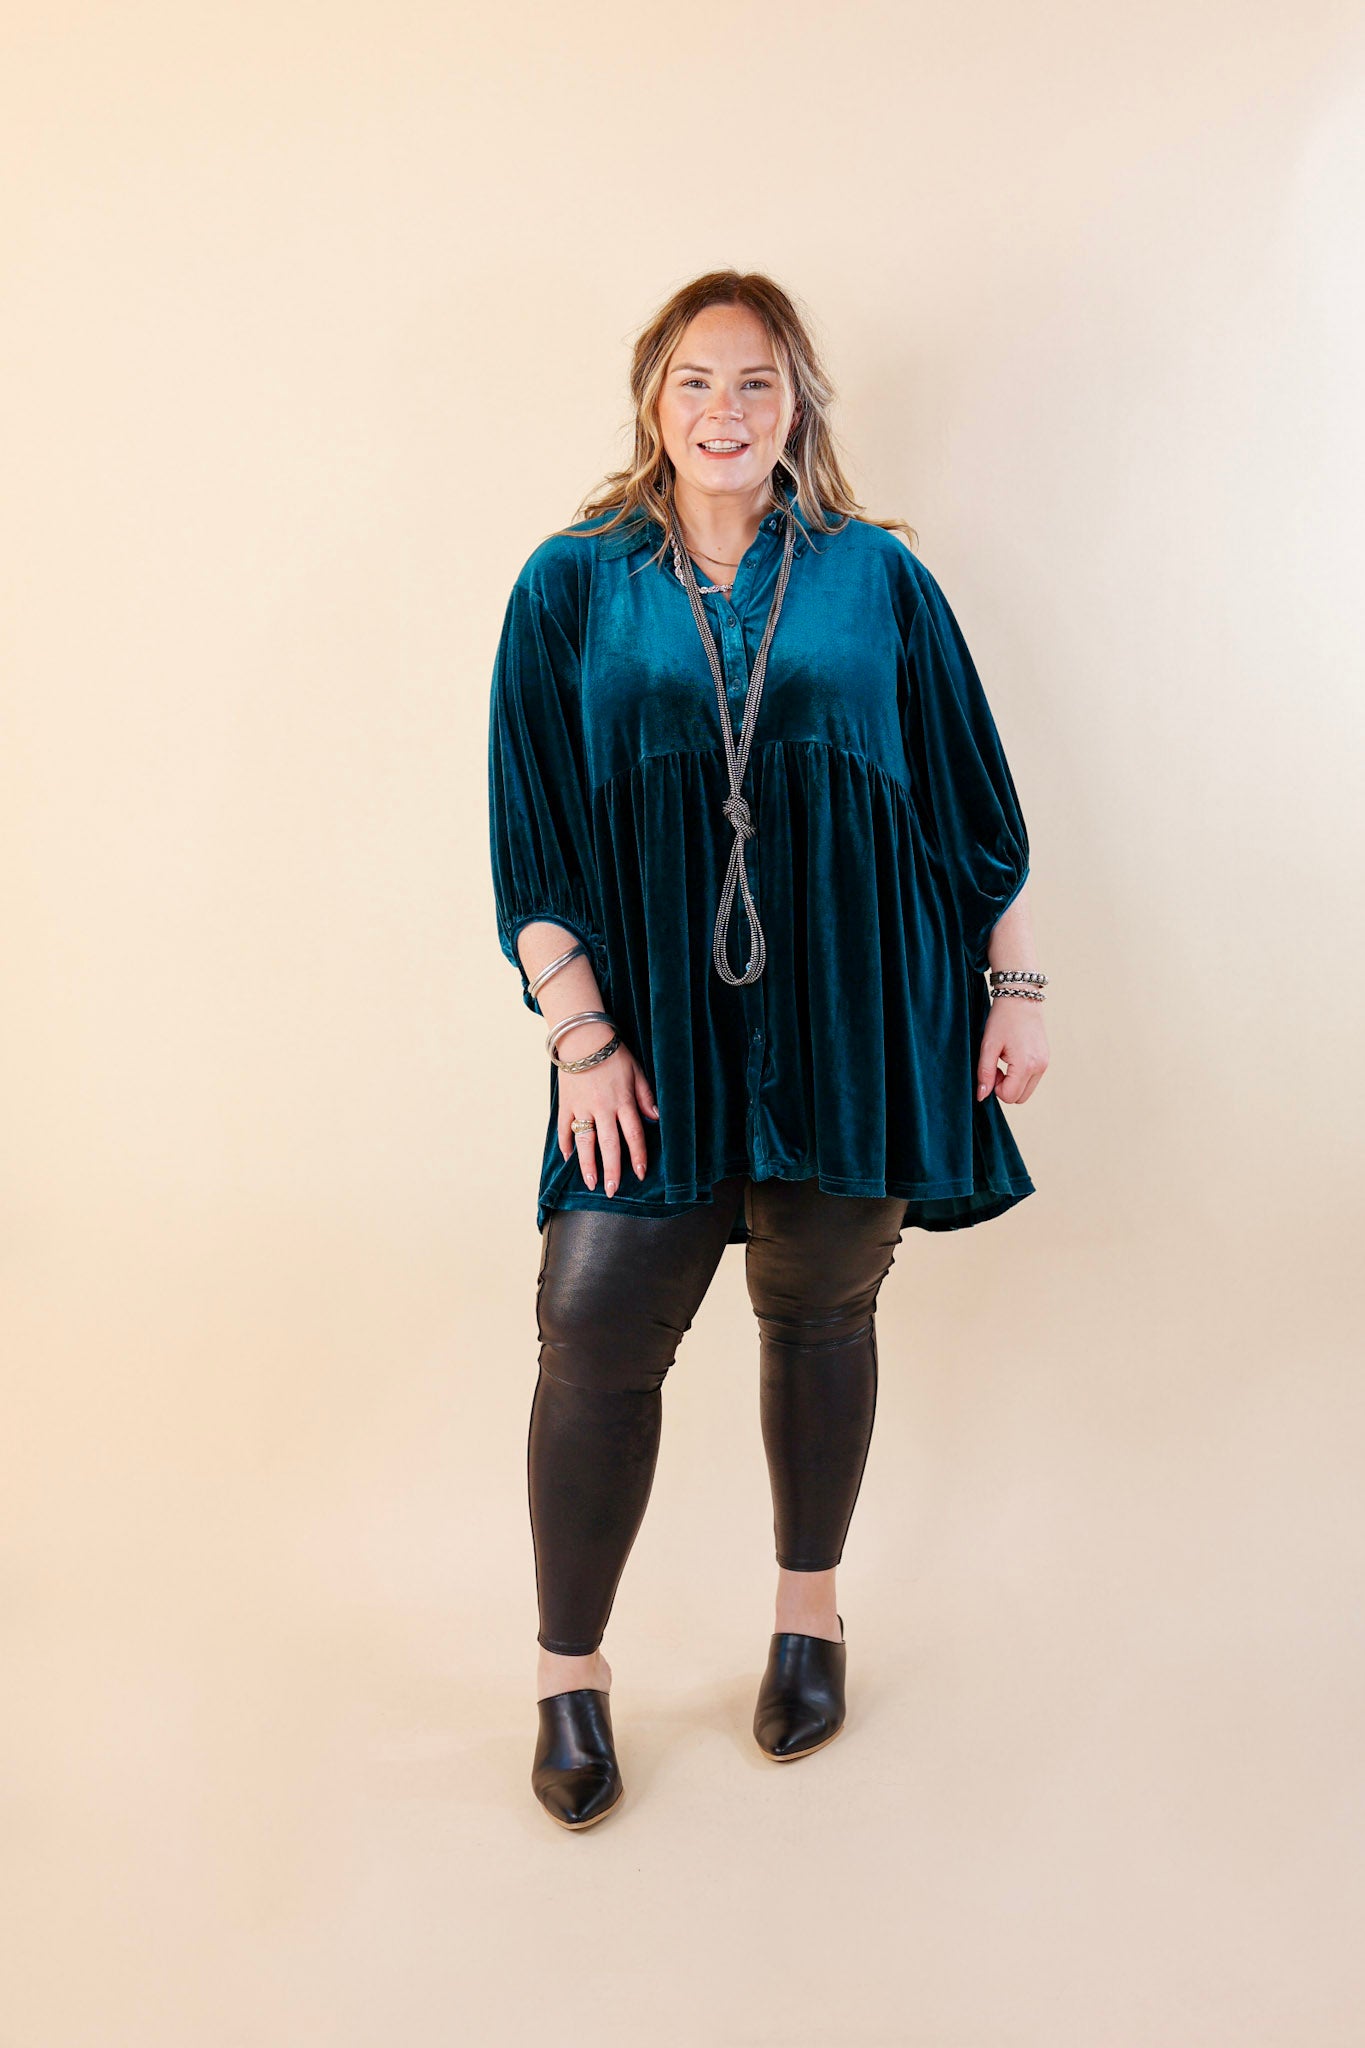 Love Link Button Up Velvet Half Sleeve Babydoll Tunic Top in Teal Blue - Giddy Up Glamour Boutique